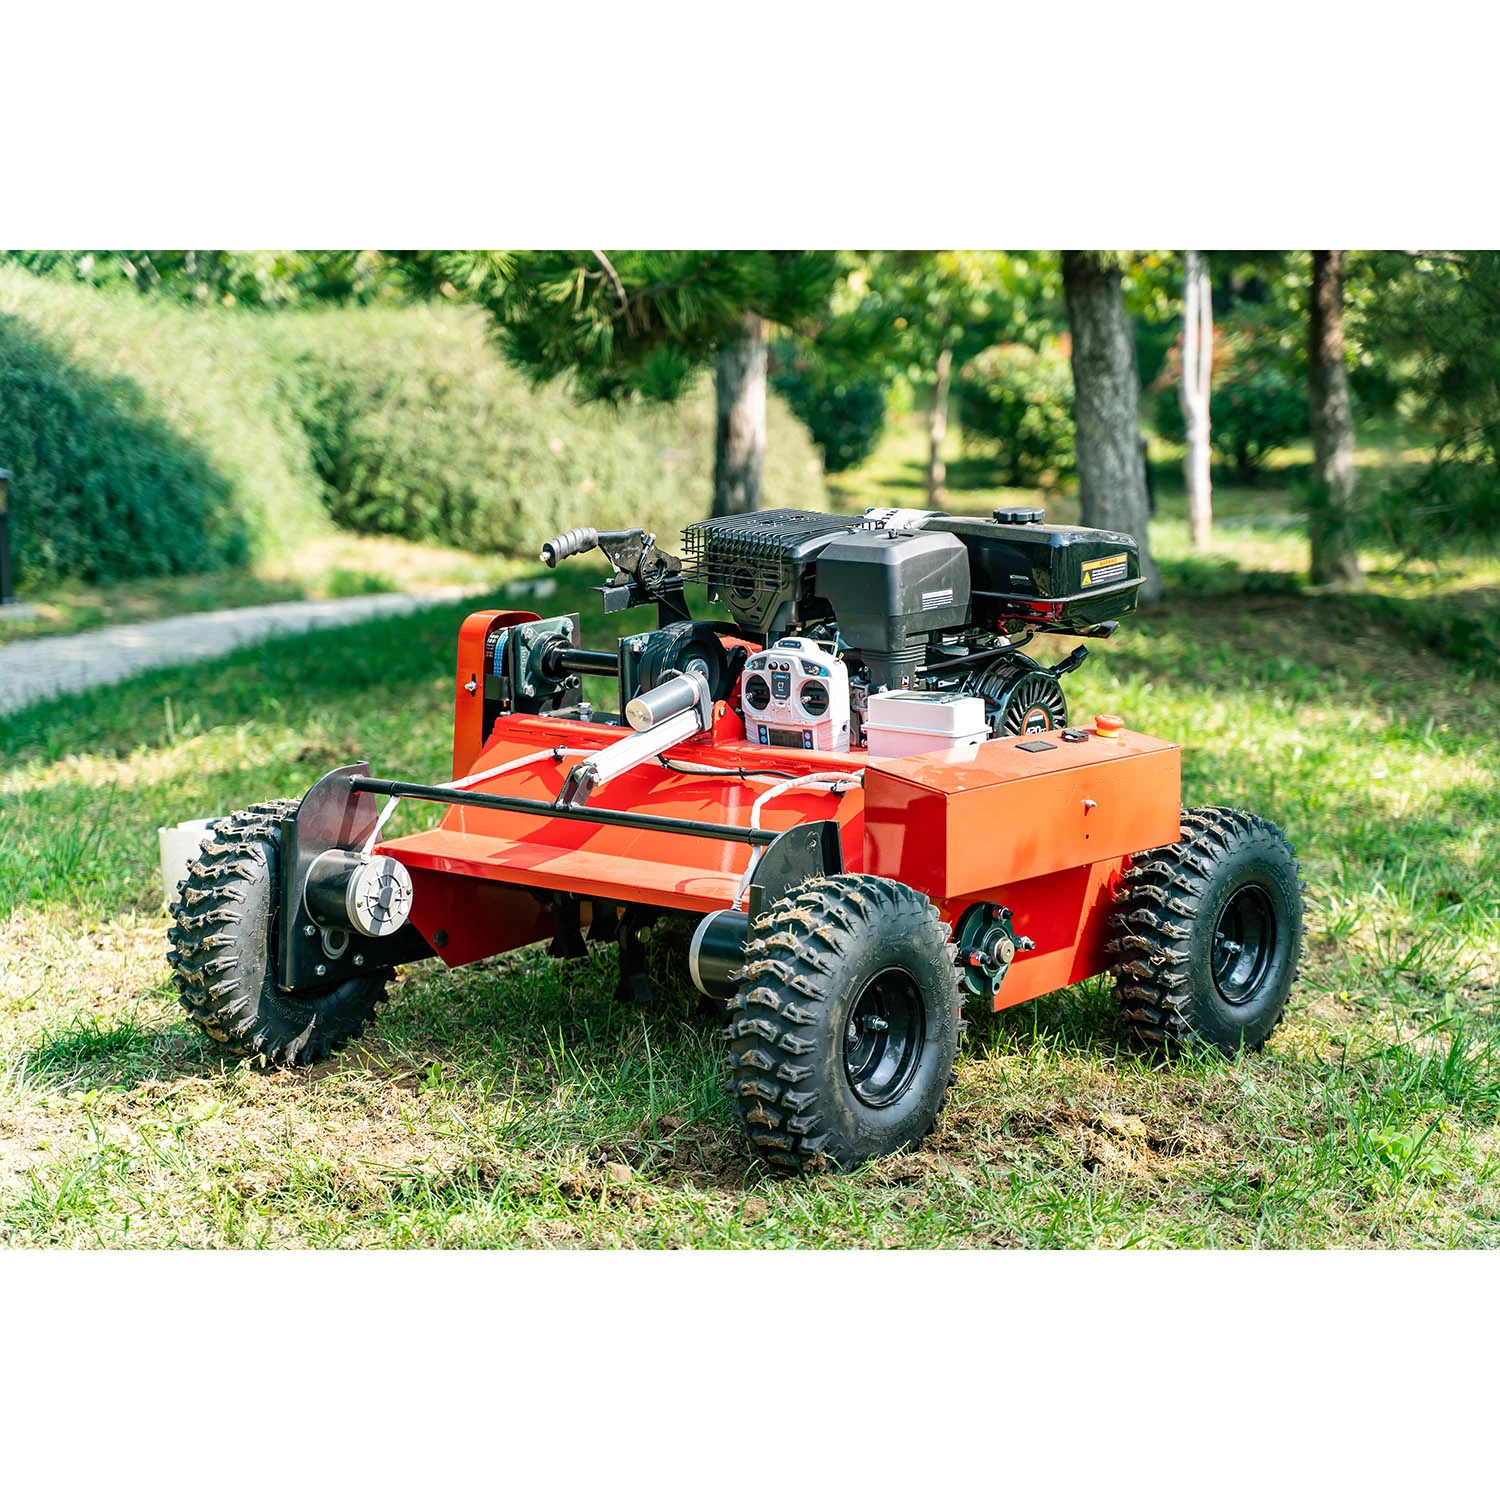 High Quality CE Approve Grass Cutting Machine Crawler Brush Cutter for Agriculture Electric Remote Control Flail Lawn Mower